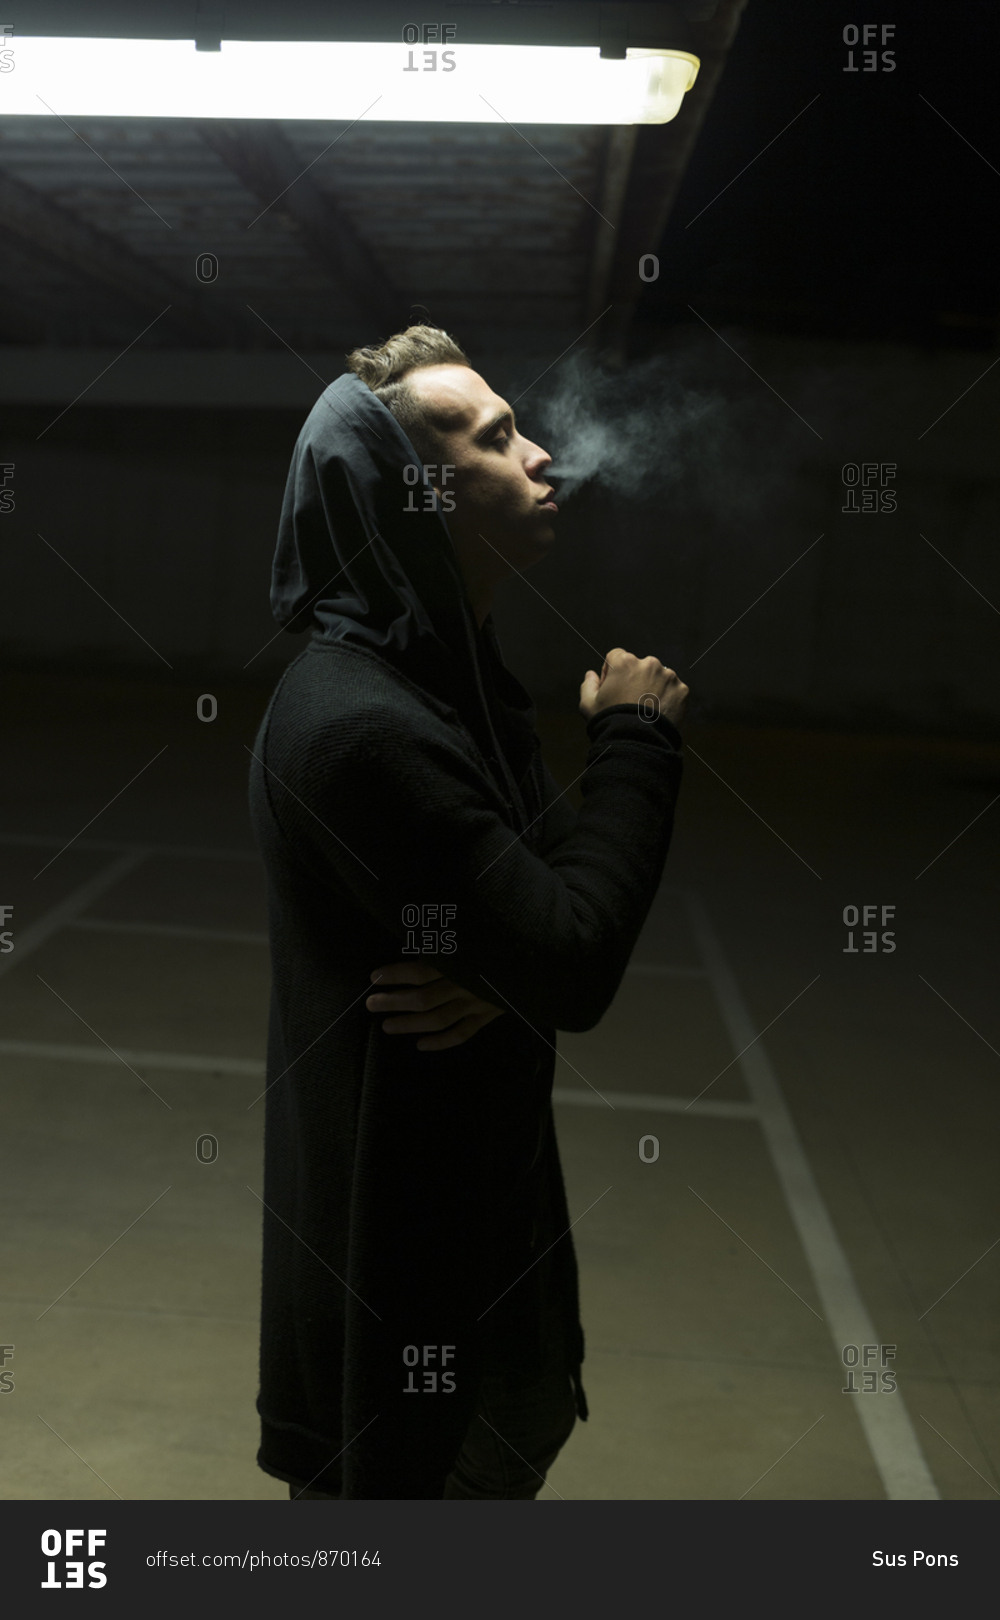 Profile view of a man in a parking garage at night covering his face with sweater